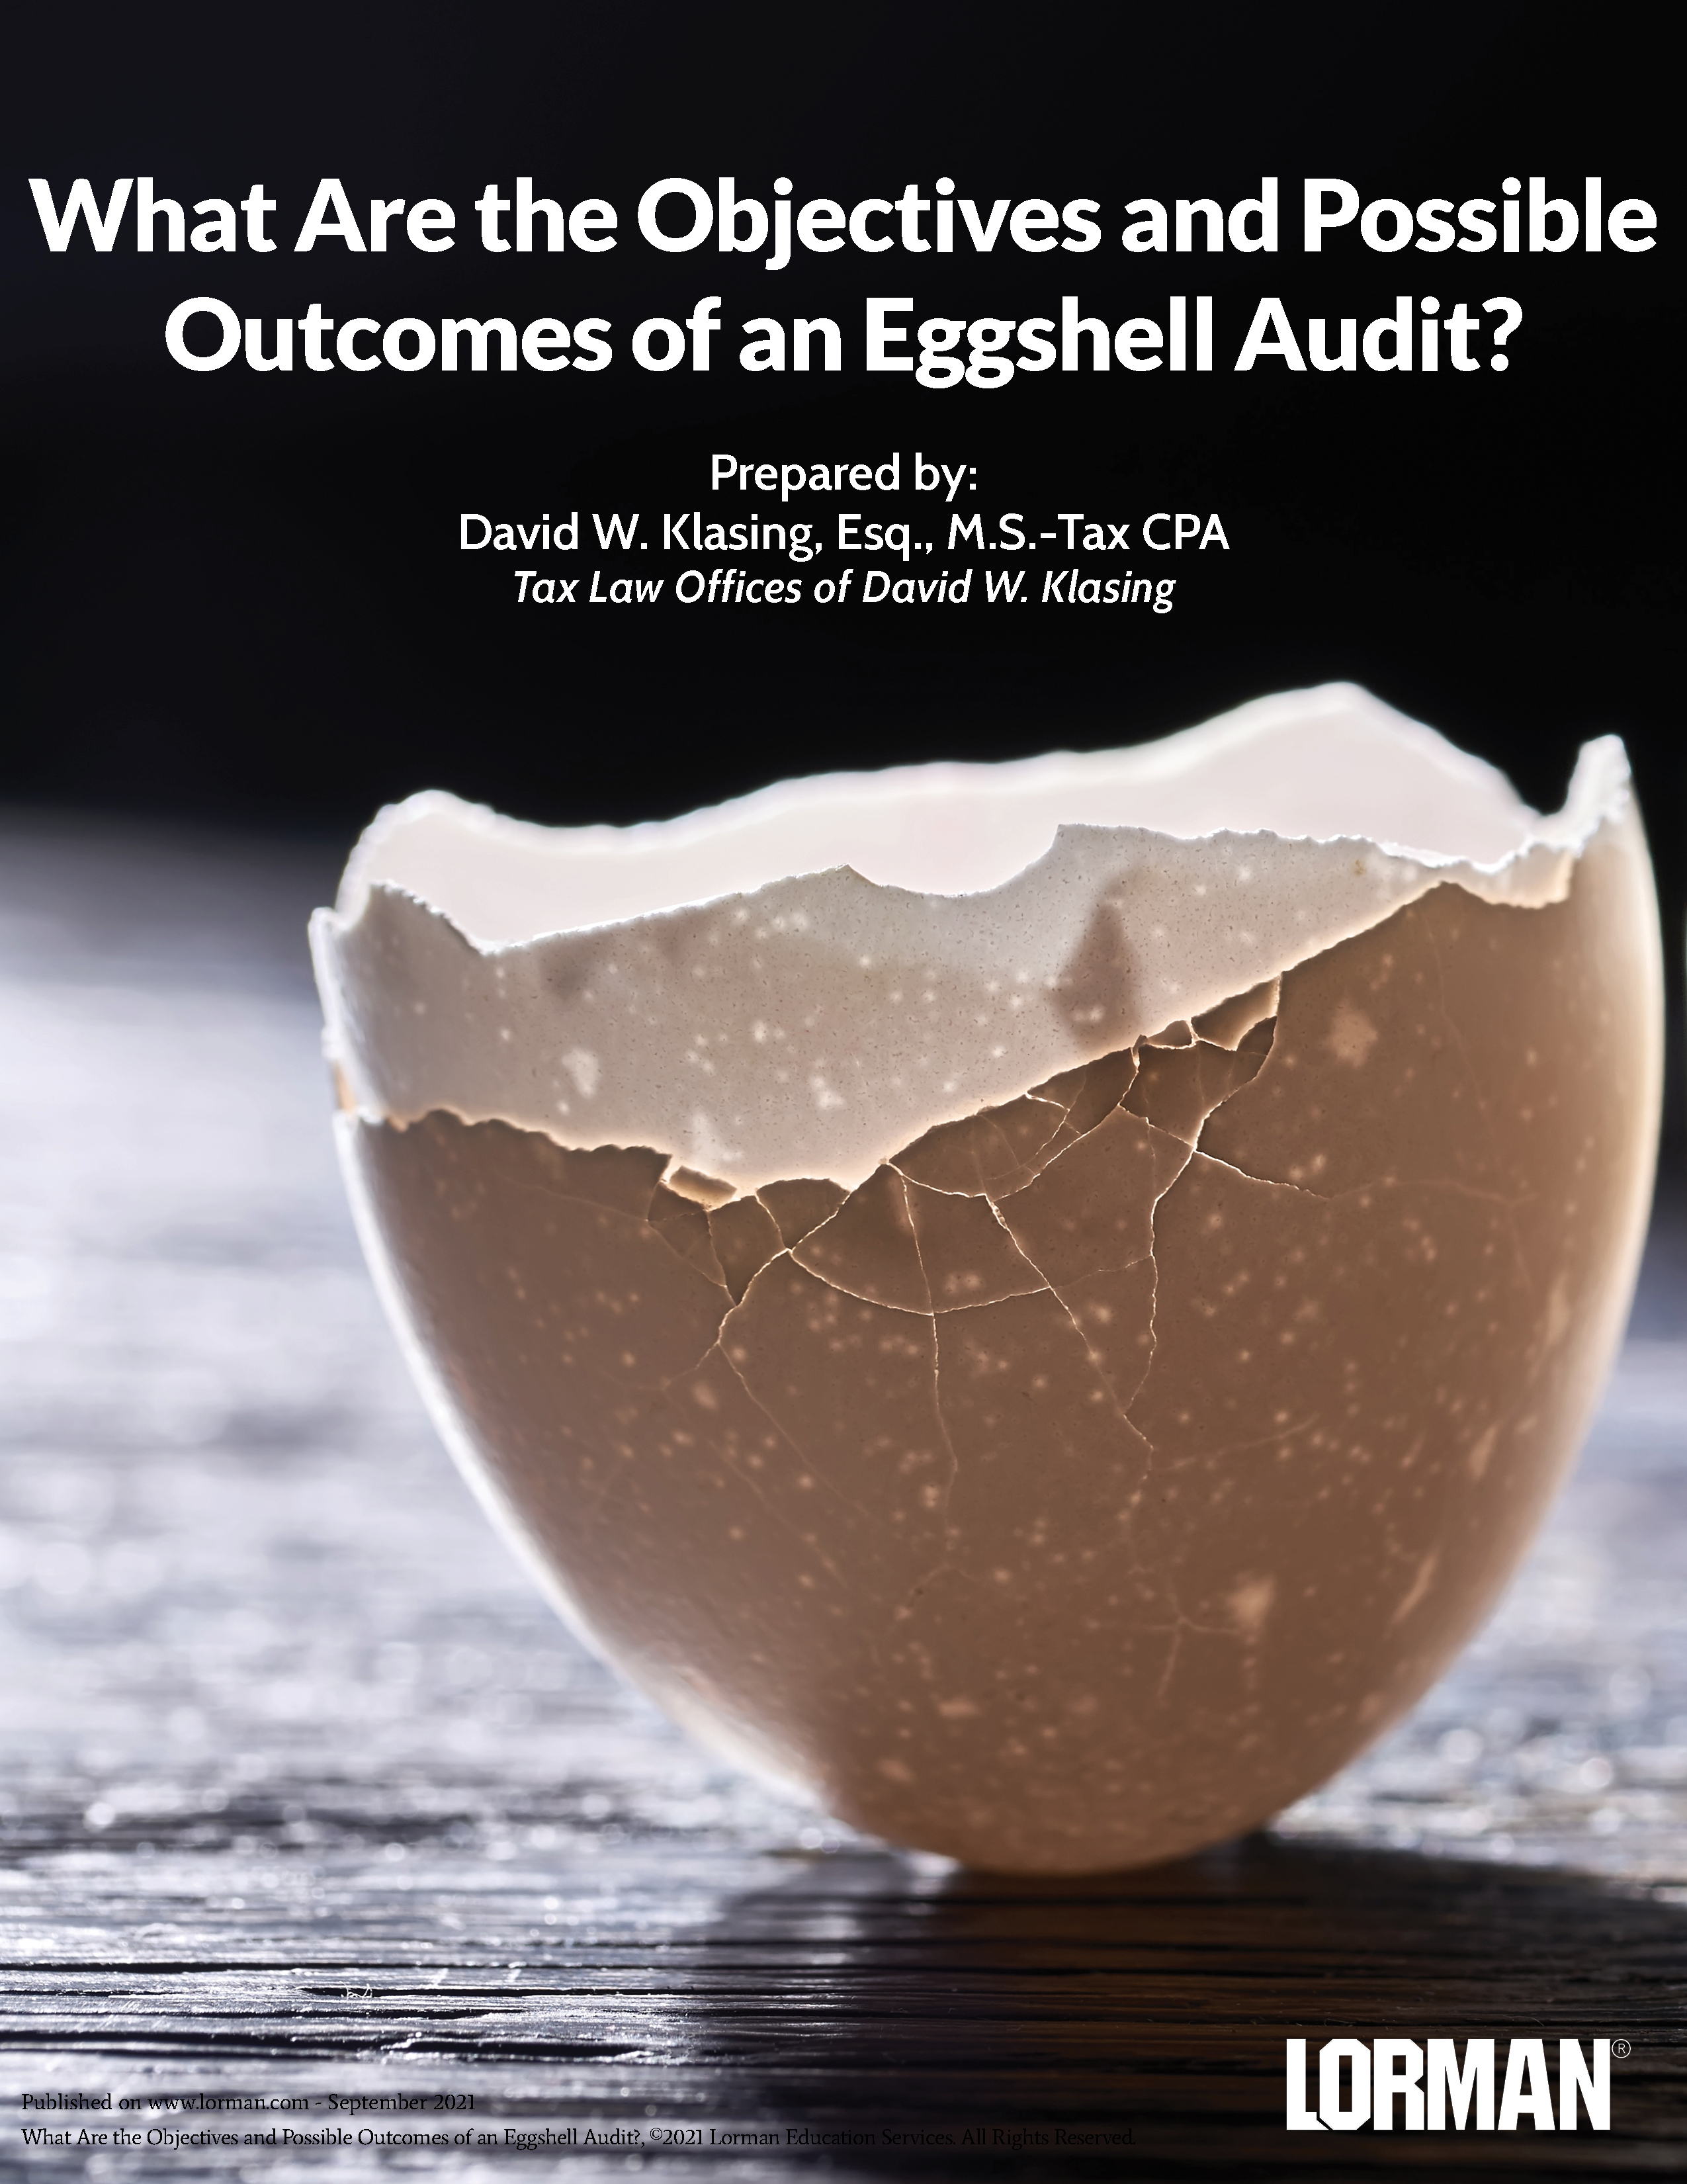 What Are the Objectives and Possible Outcomes of an Eggshell Audit?